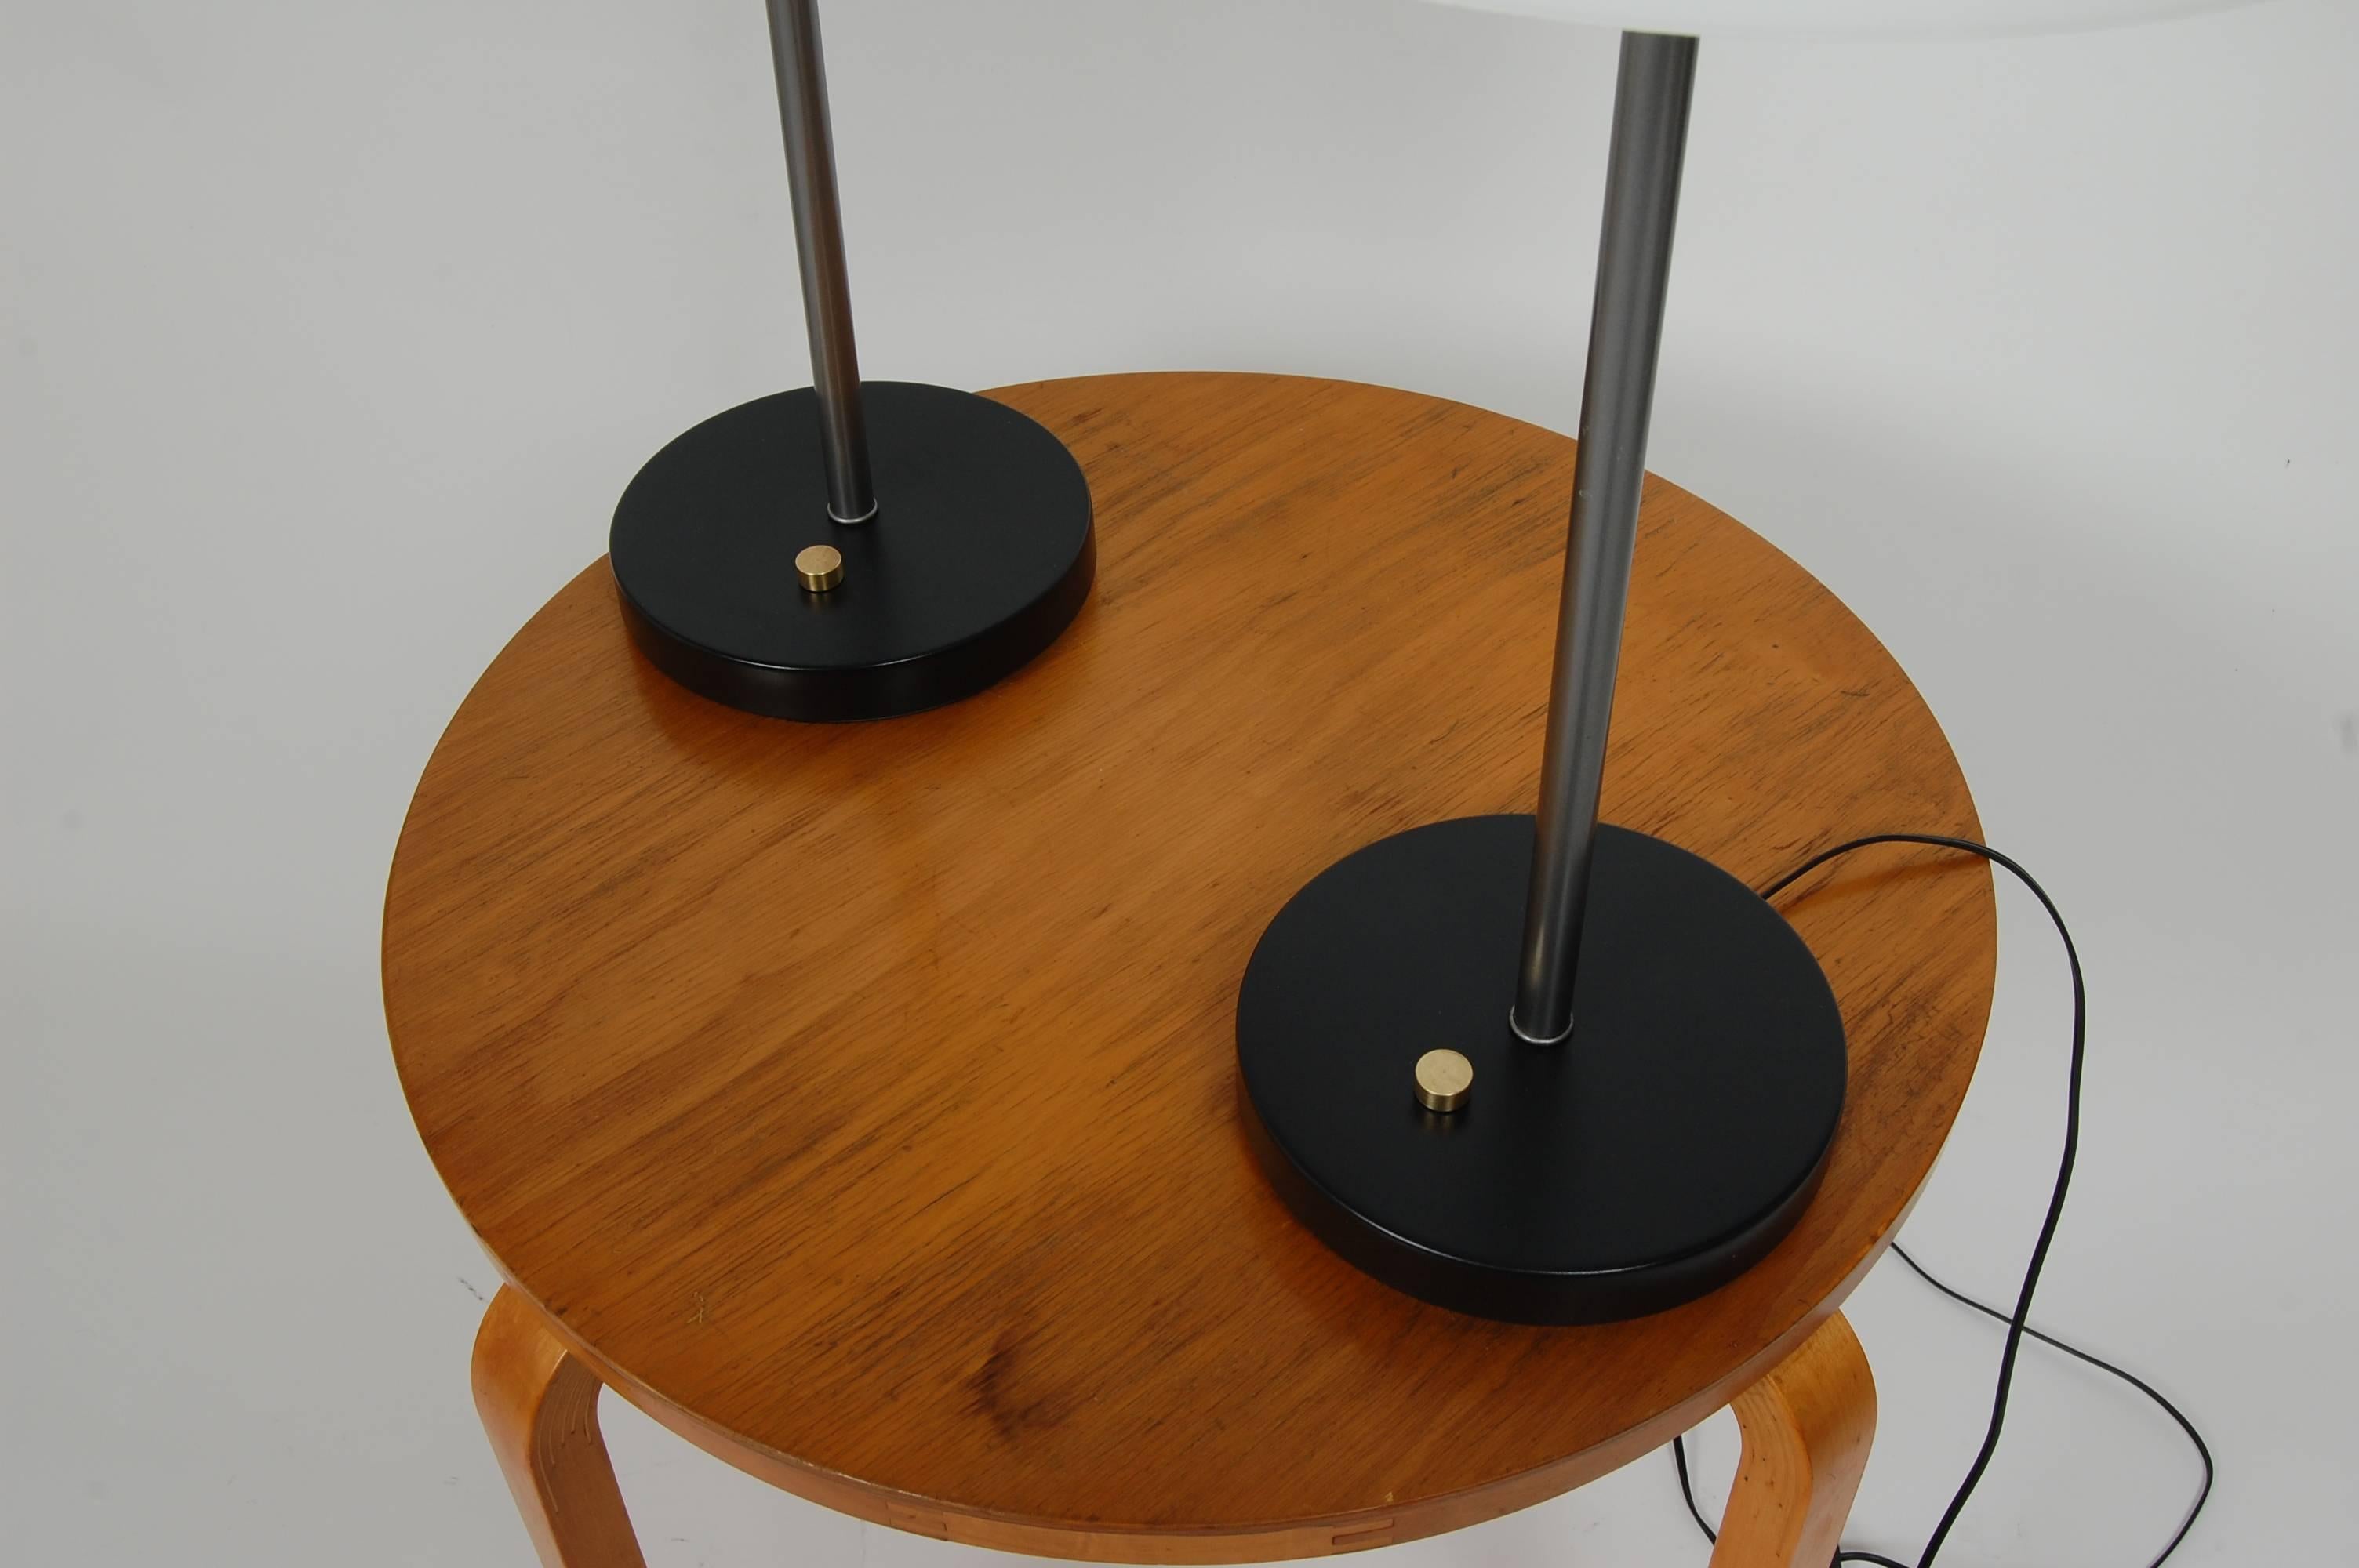 Painted Pair of Koch & Lowy Table Lamps 1970s Modern